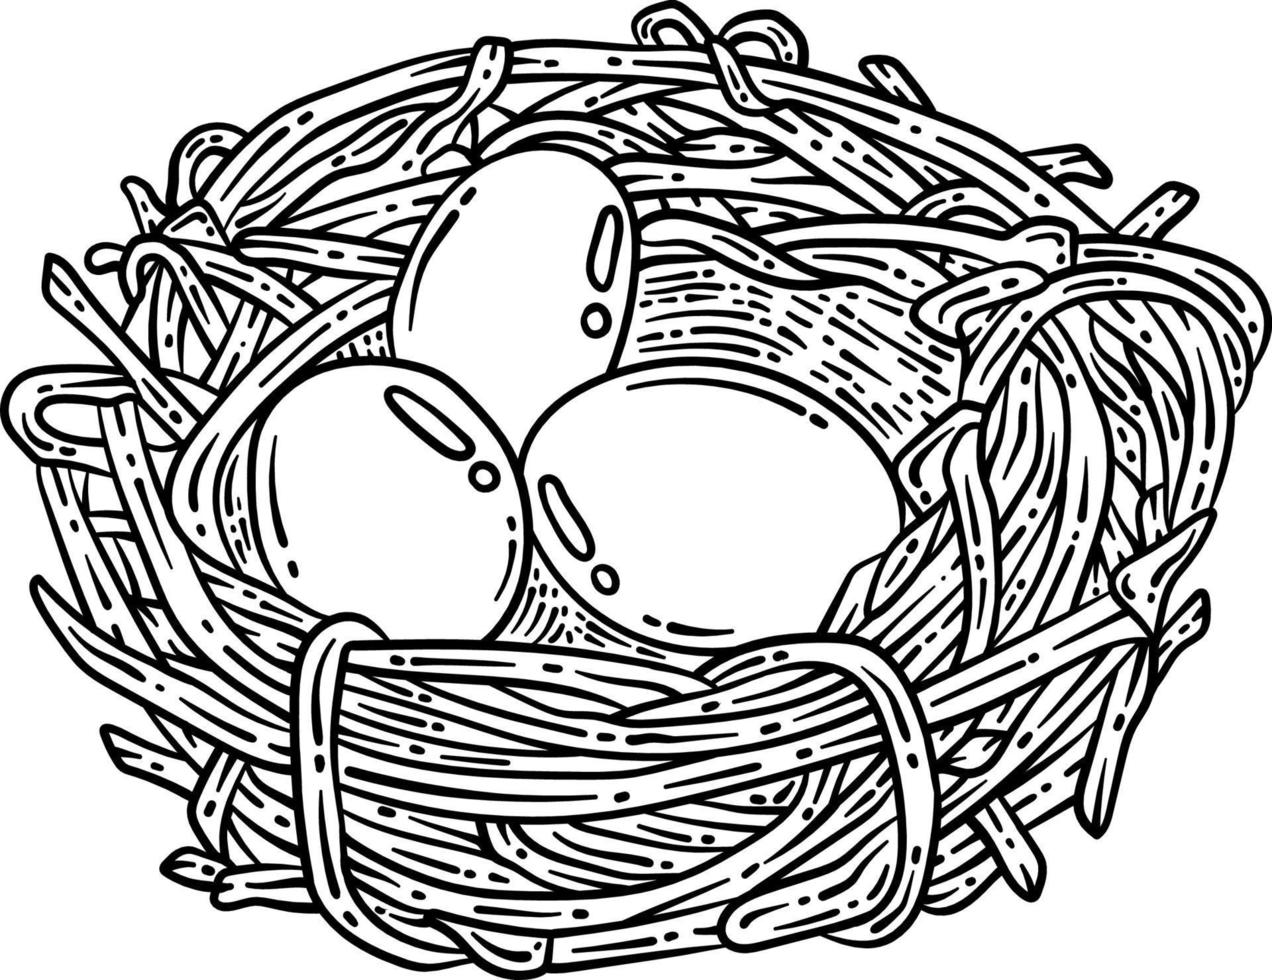 Nest With Eggs Spring Coloring Page for Adults vector